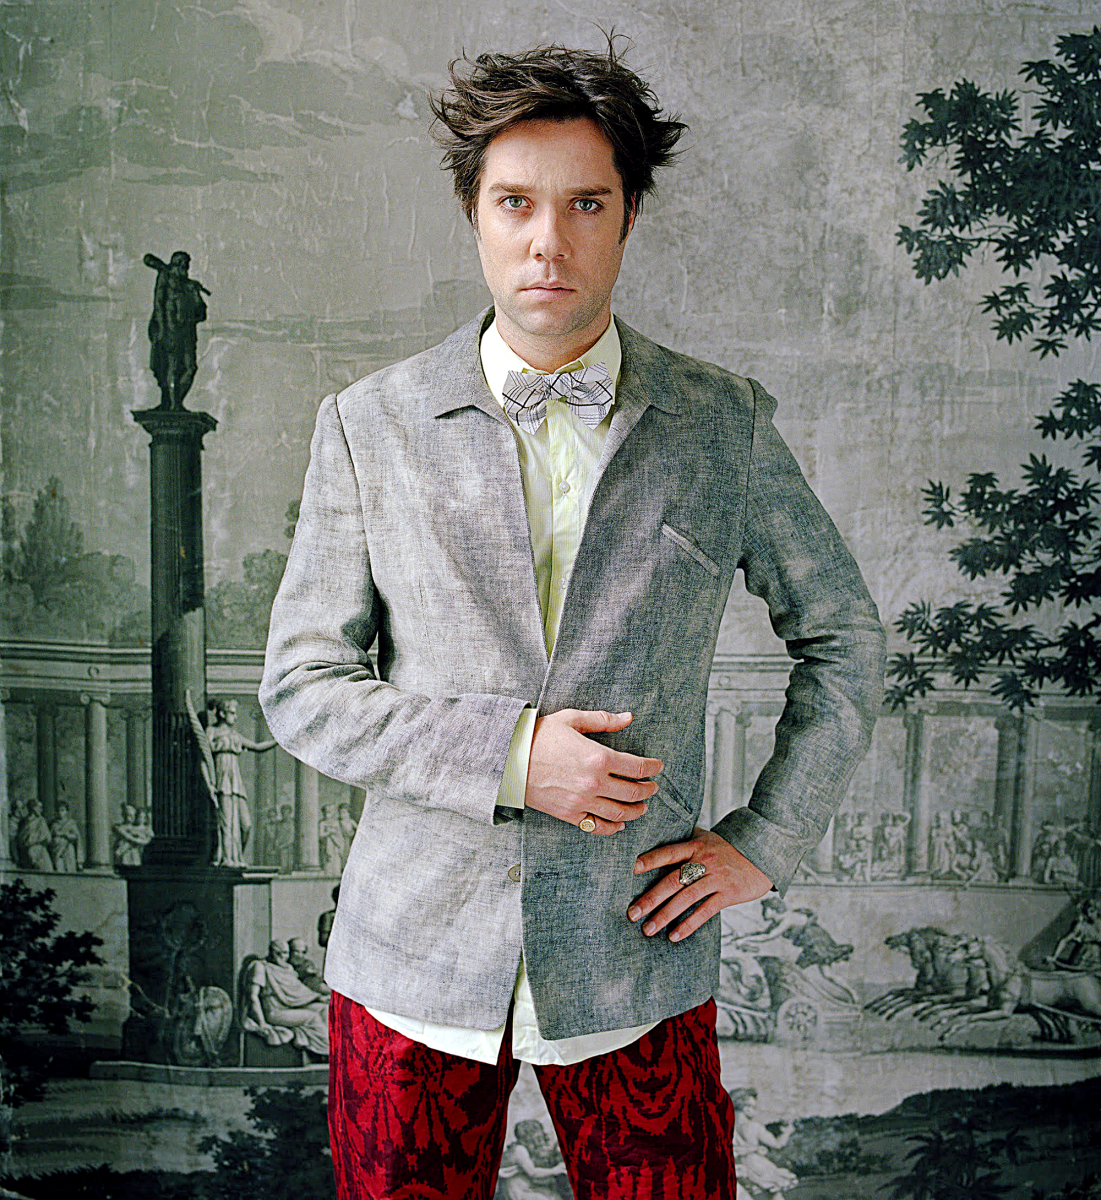 John Cale's version of "Hallelujah" appeared in the "Shrek" movie, but it was Rufus Wainwright who appeared on the soundtrack due to record label conflicts.